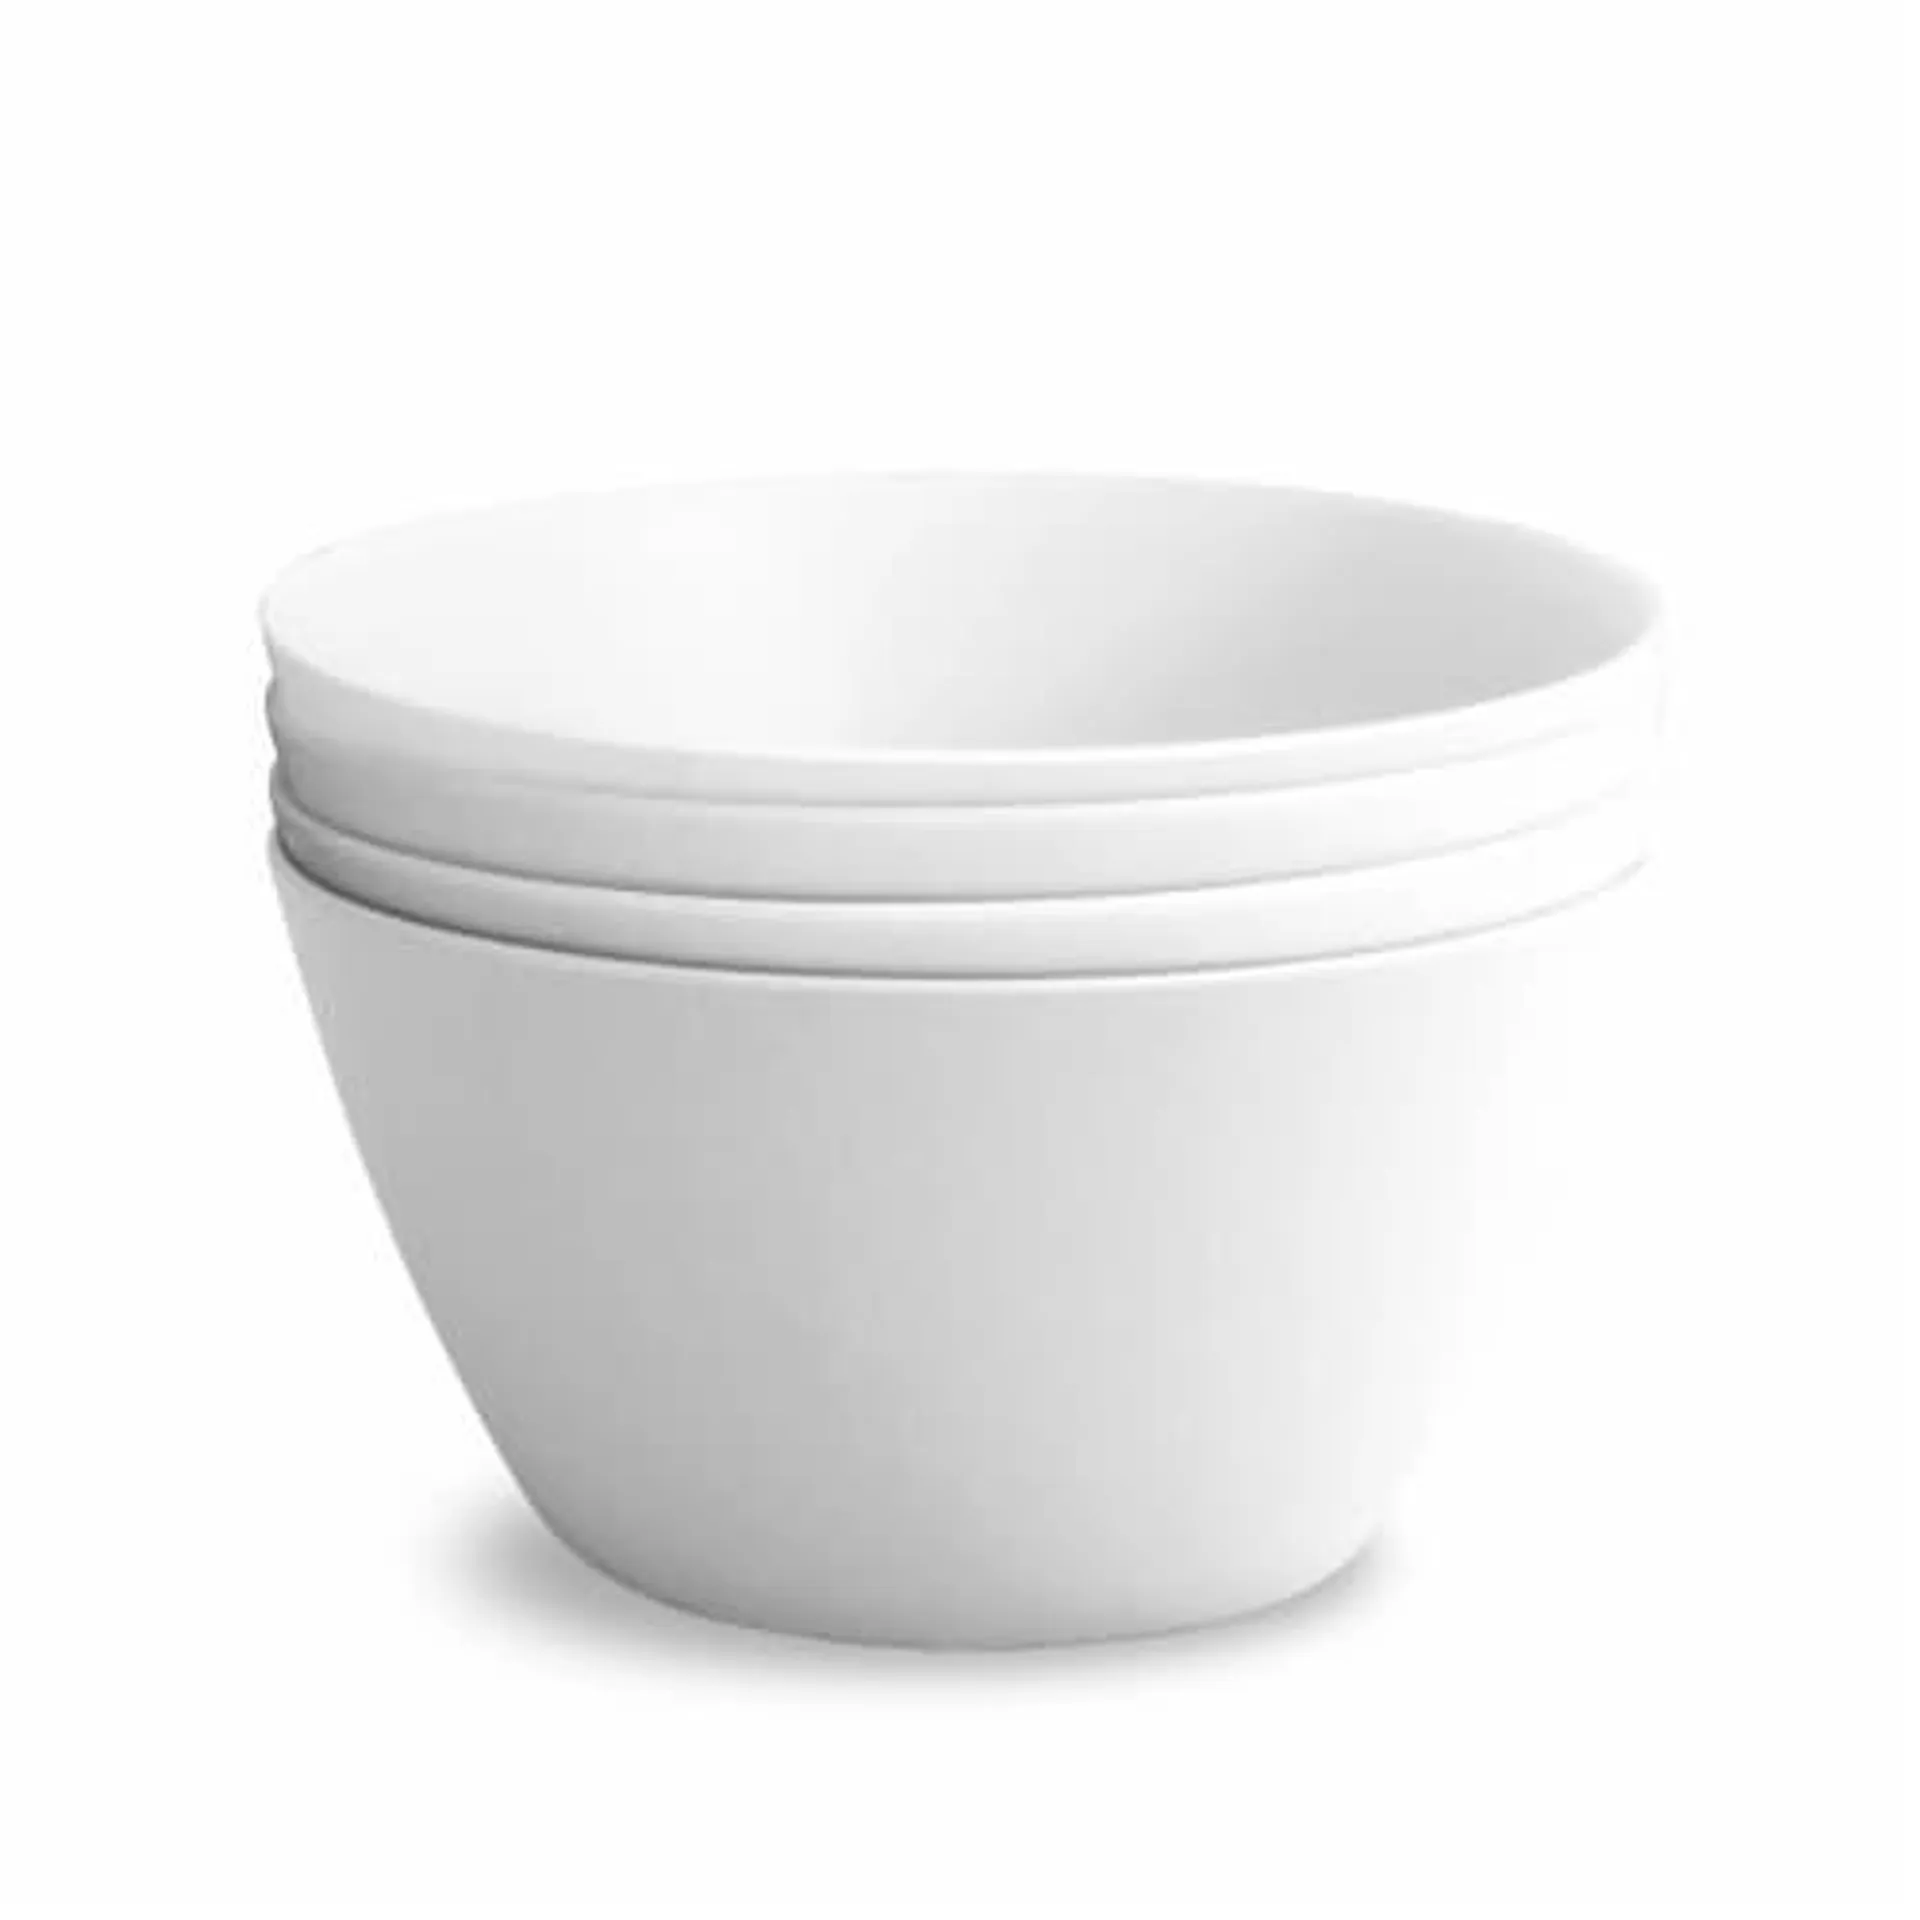 HD Designs Outdoors Cereal Bowls - White